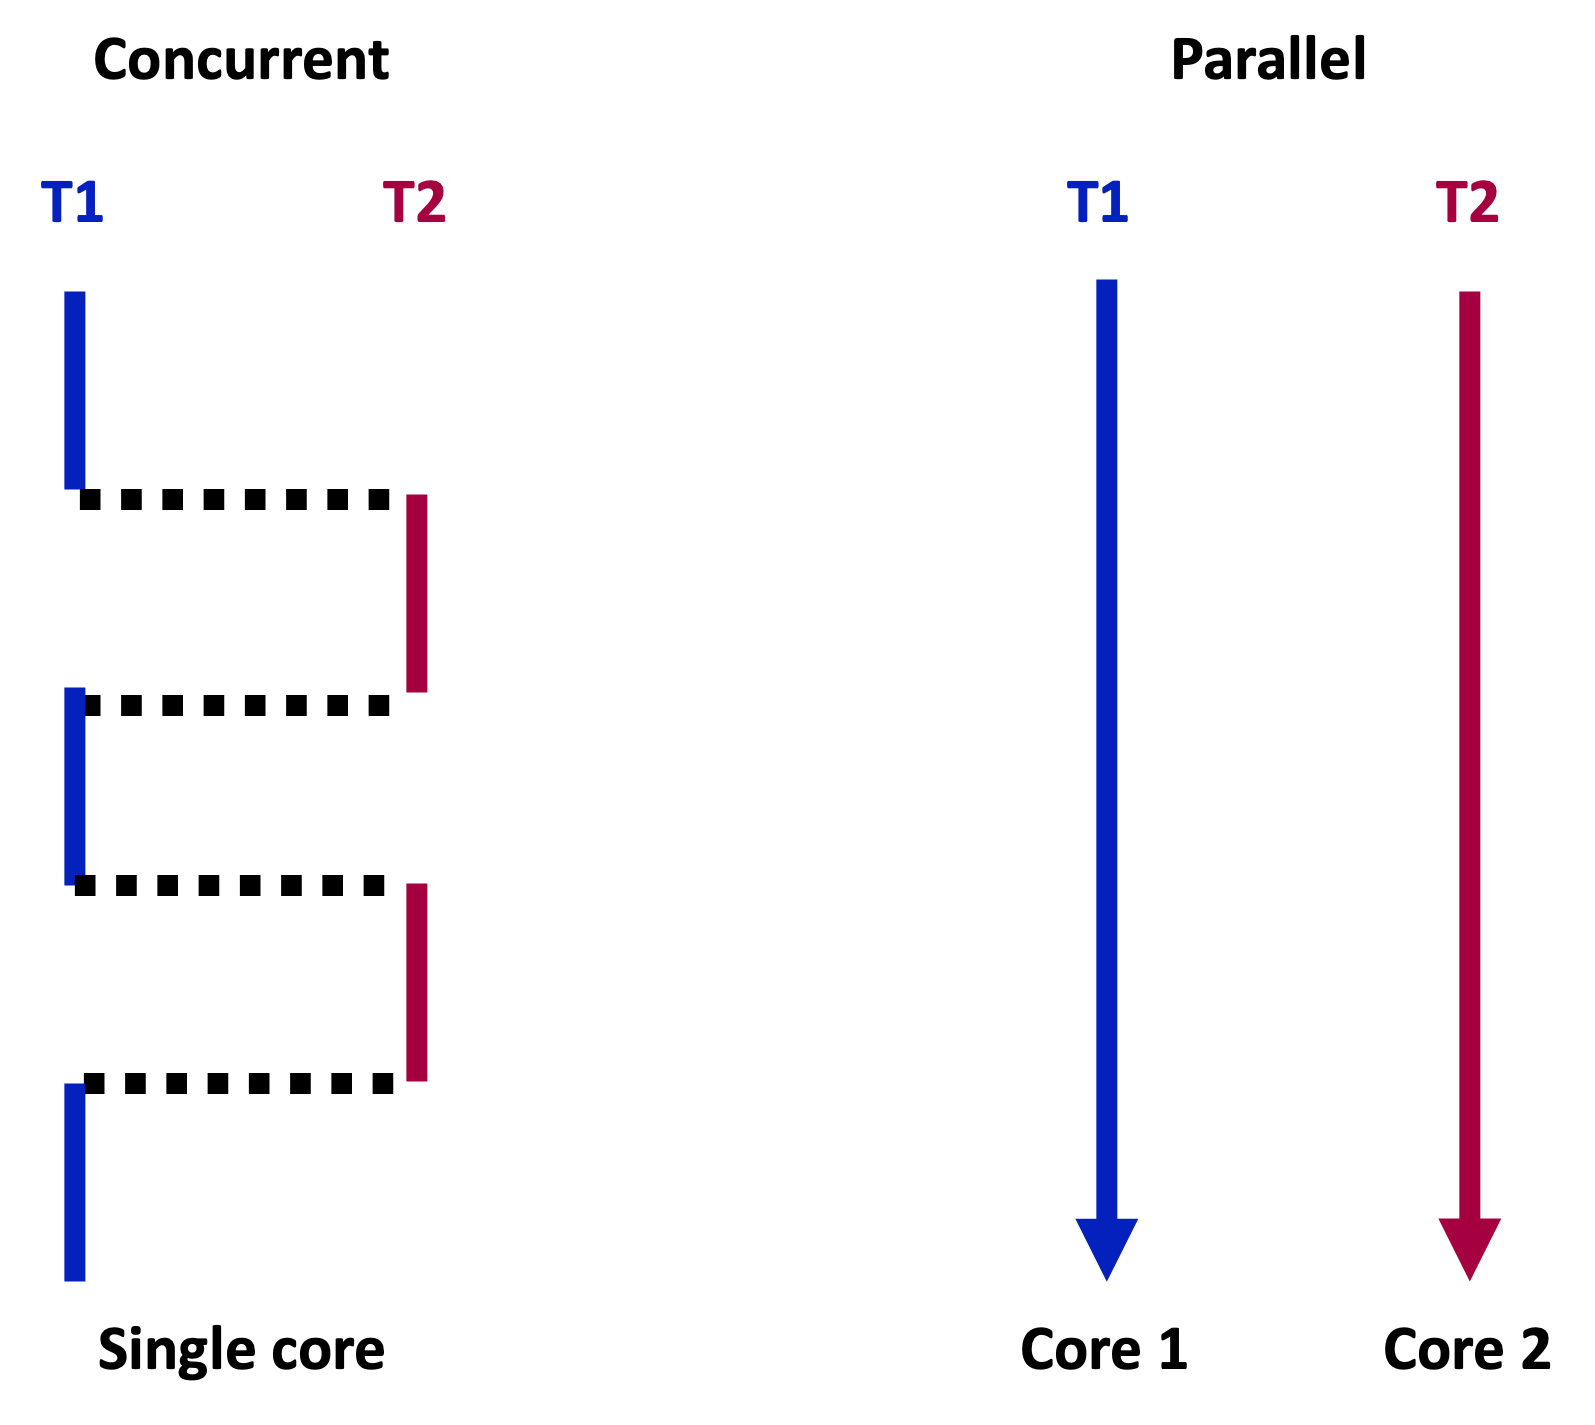 Fig. 1. Simplified illustration of two tasks executed under concurrency and parallelism